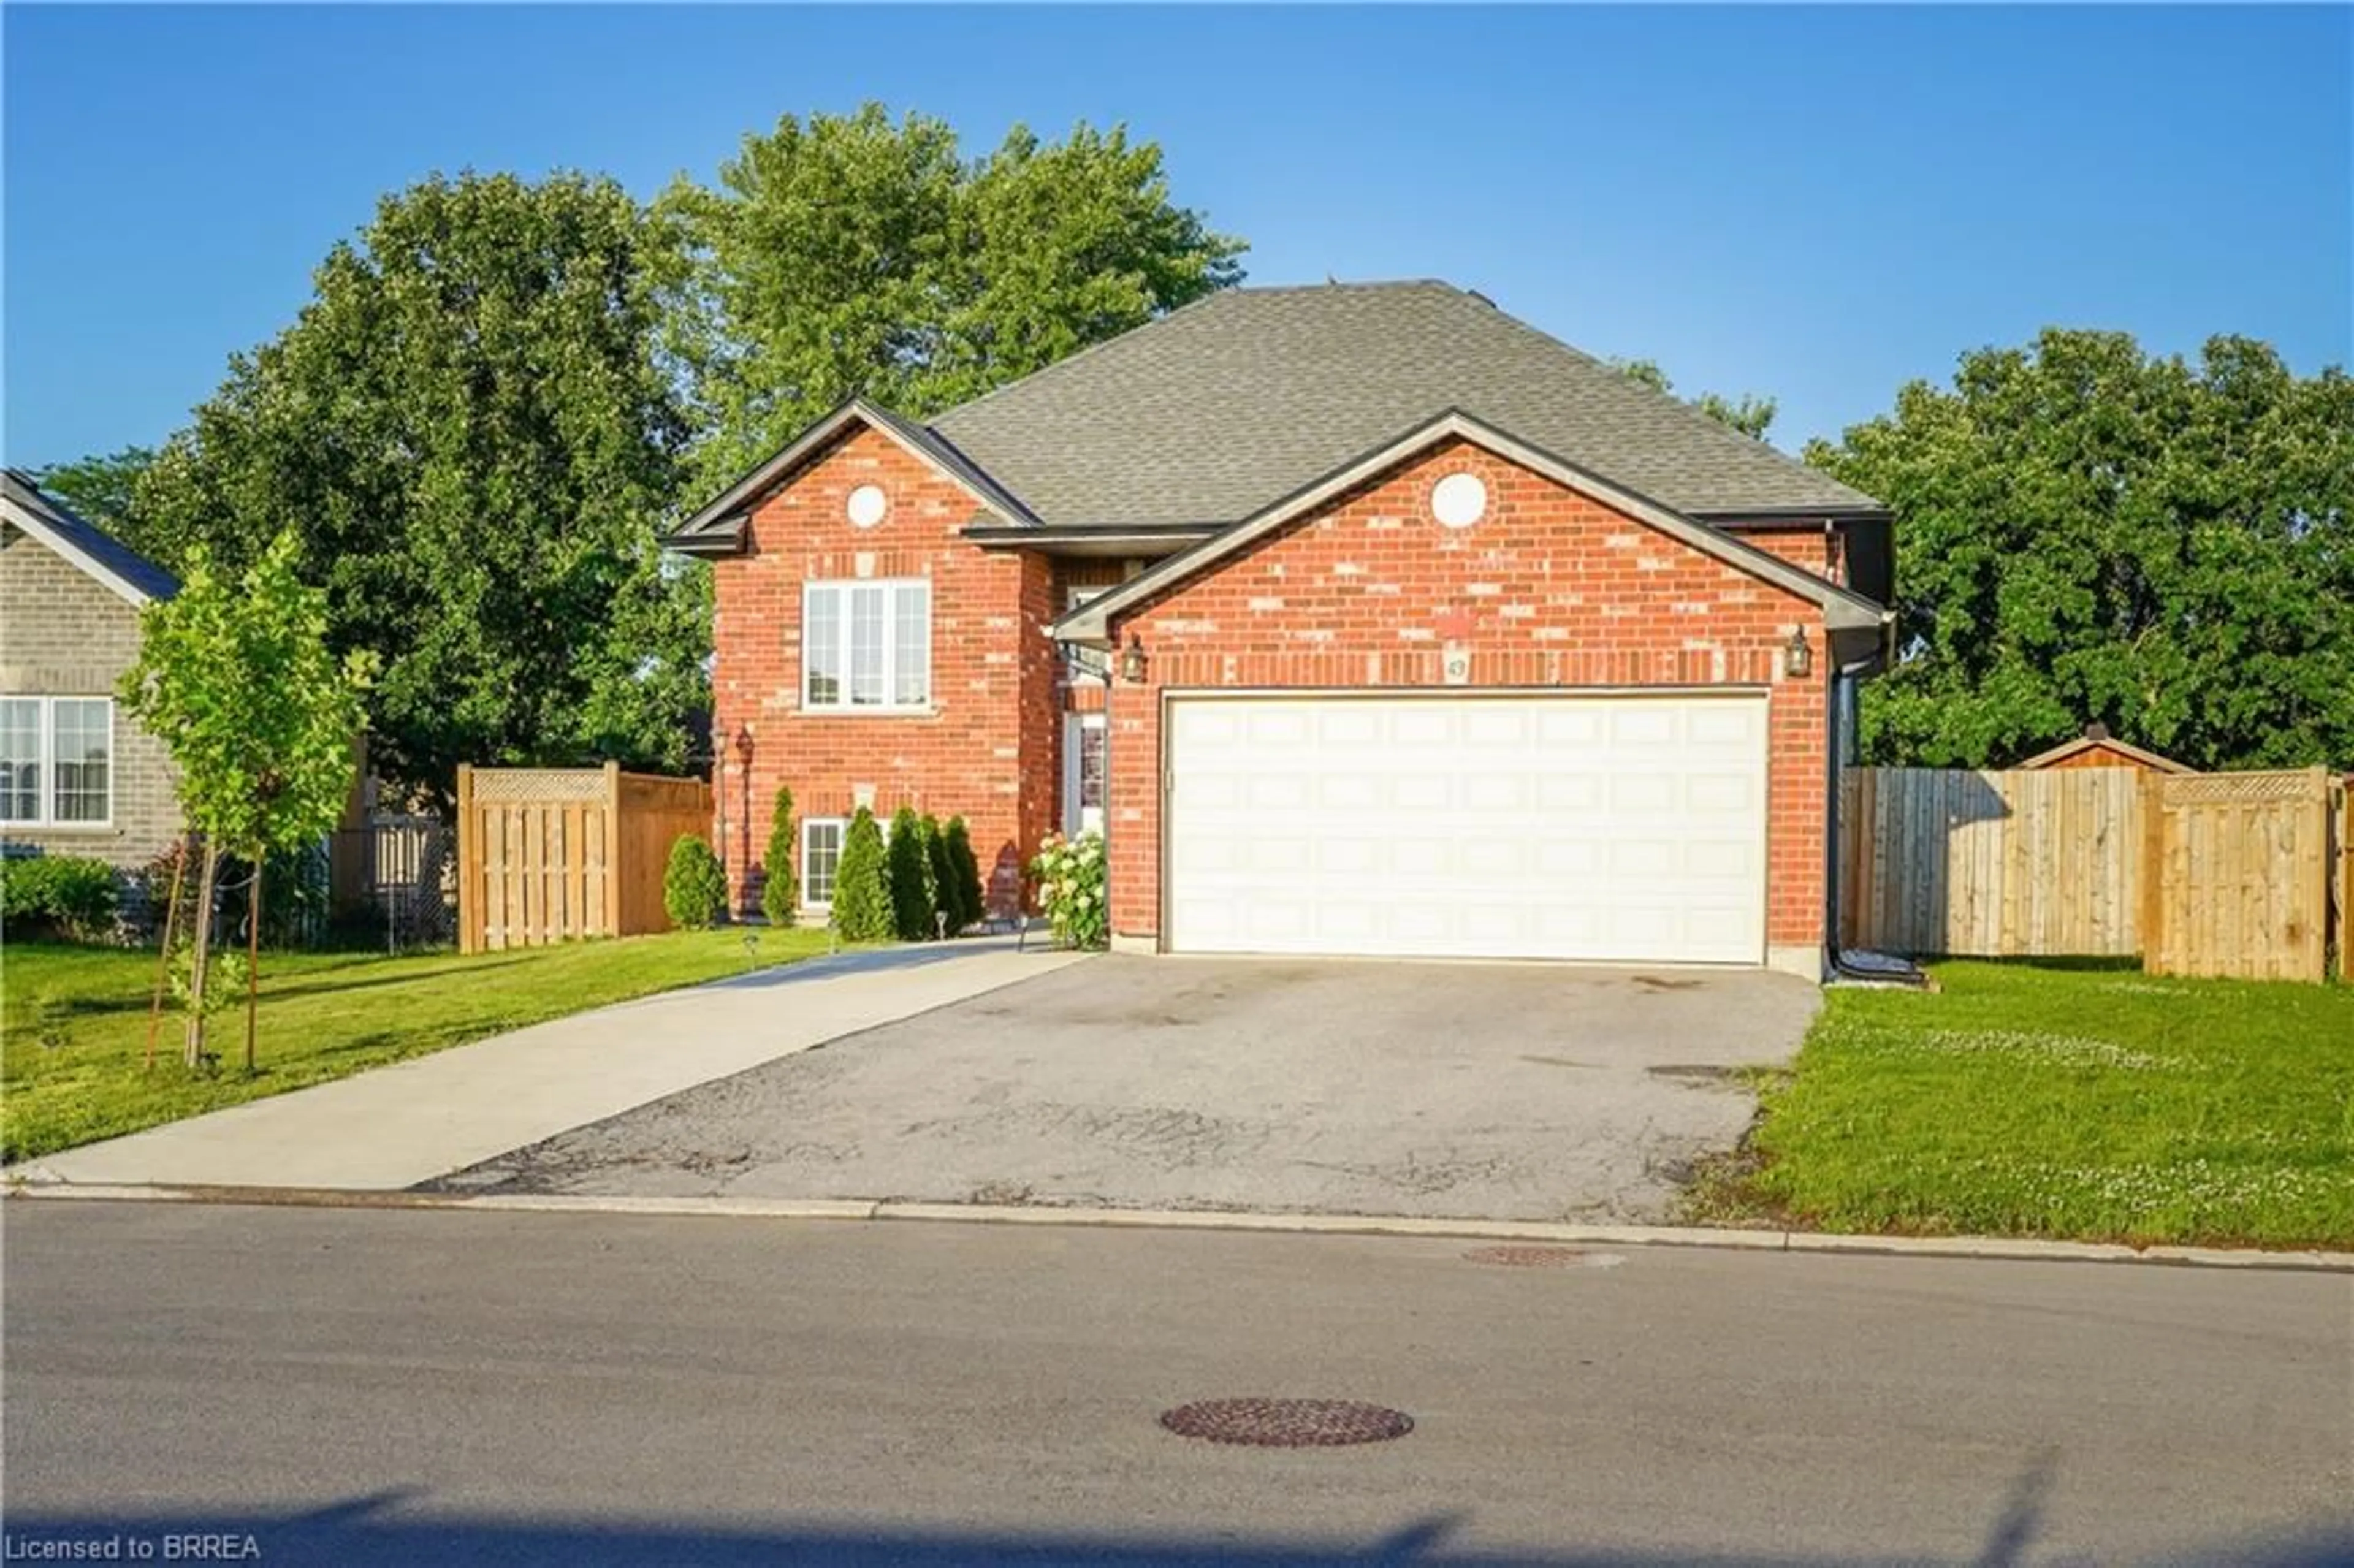 Home with brick exterior material for 49 Dennis Dr, Norwich Ontario N0J 1P0